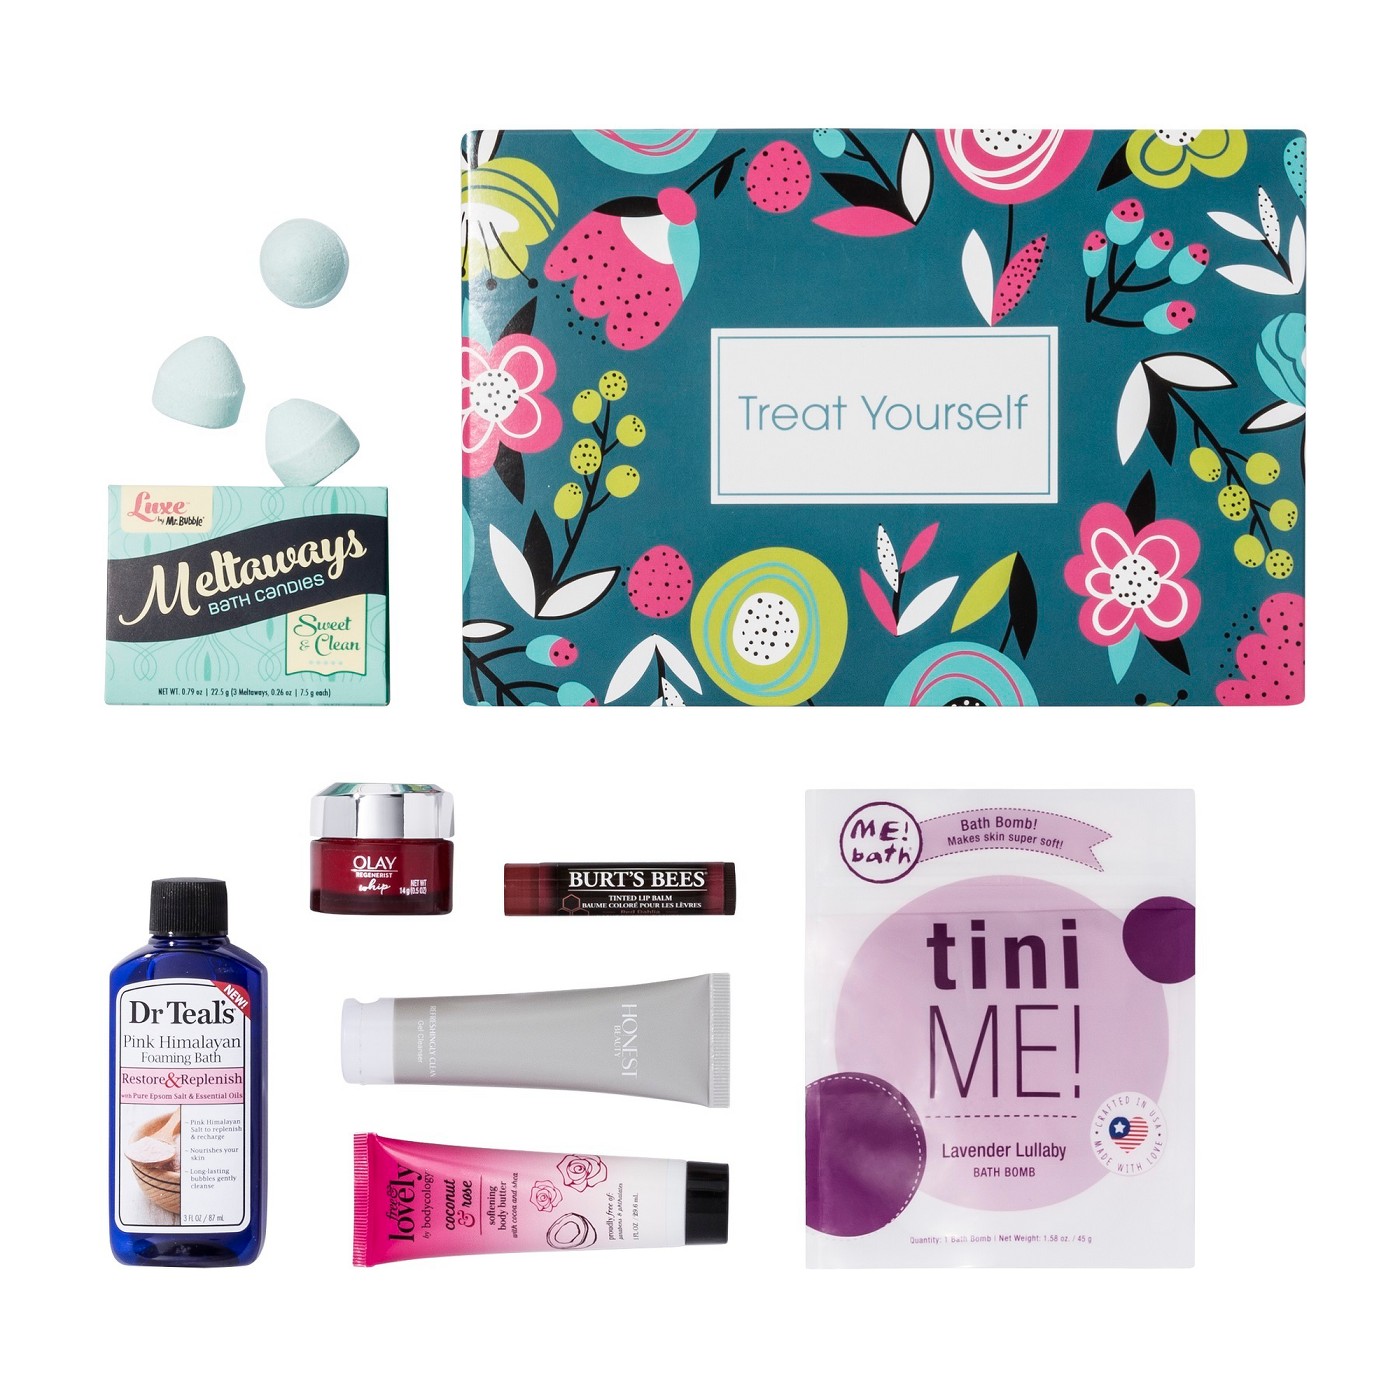 Treat Yourself Target Beauty Gift Box Only $7.00!